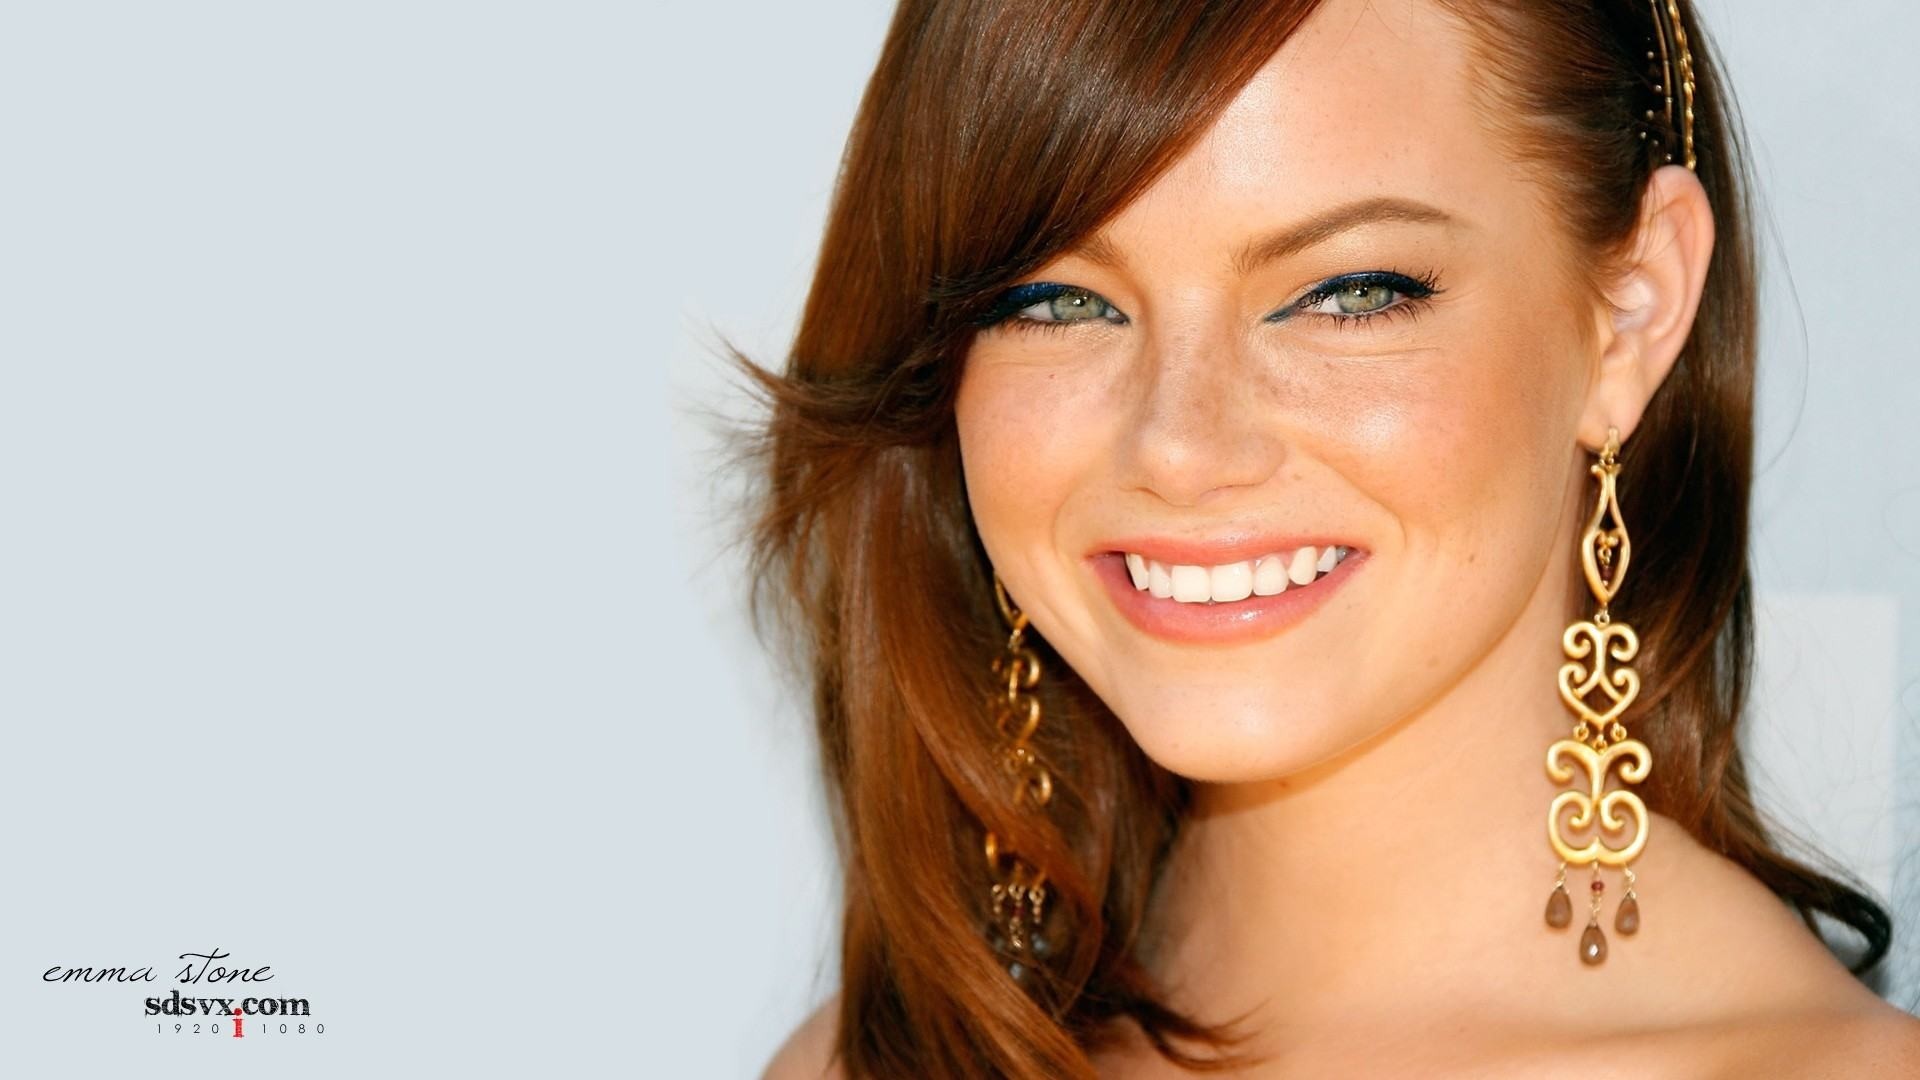 1920x1080 Wallpapers Backgrounds - Women Actress Celebrity Emma Stone Earrings  Headbands Laughing Faces